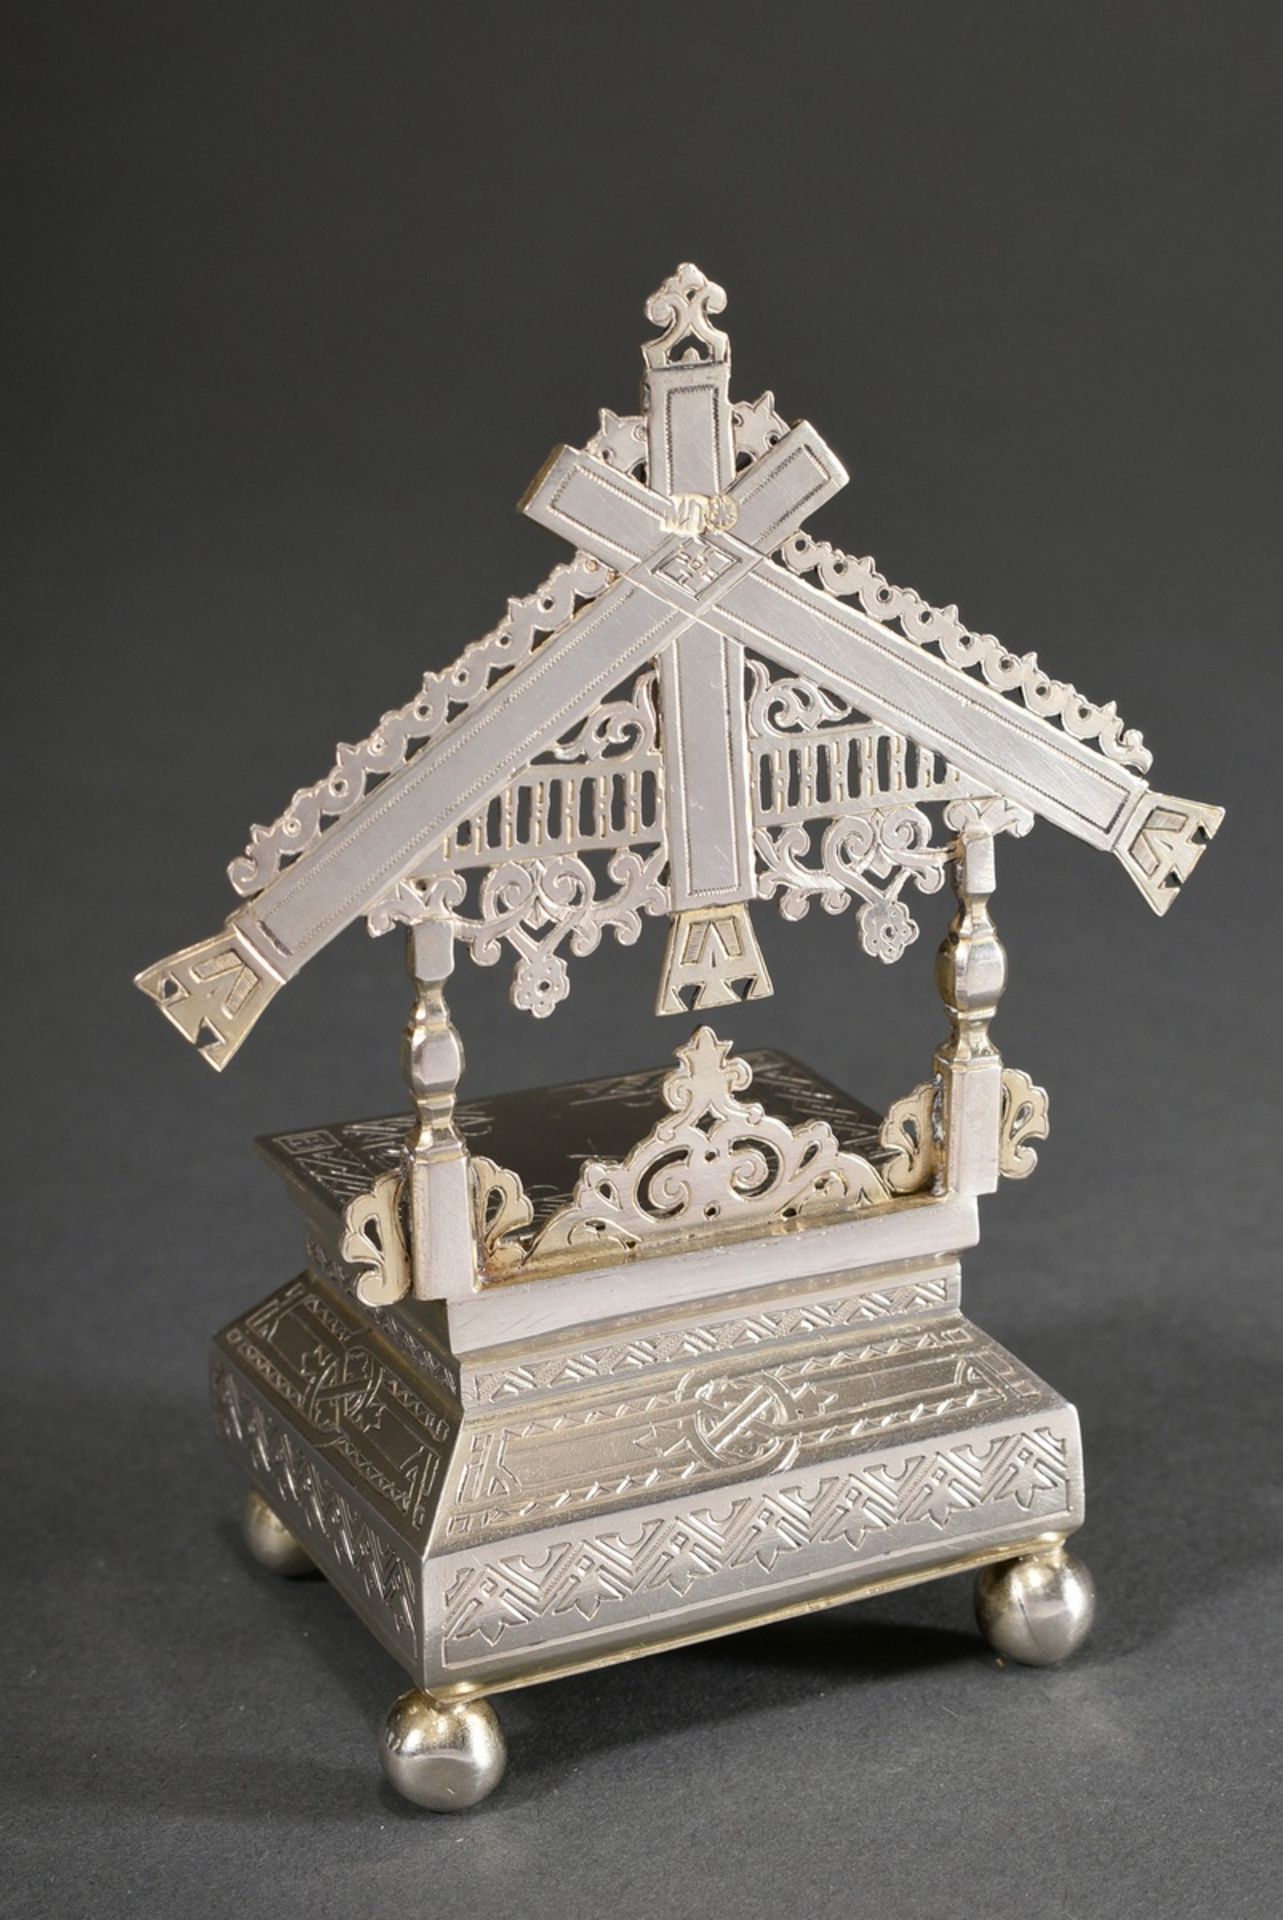 Russian salt cellar with richly engraved ornamental decoration in a traditional throne shape with a - Image 2 of 4